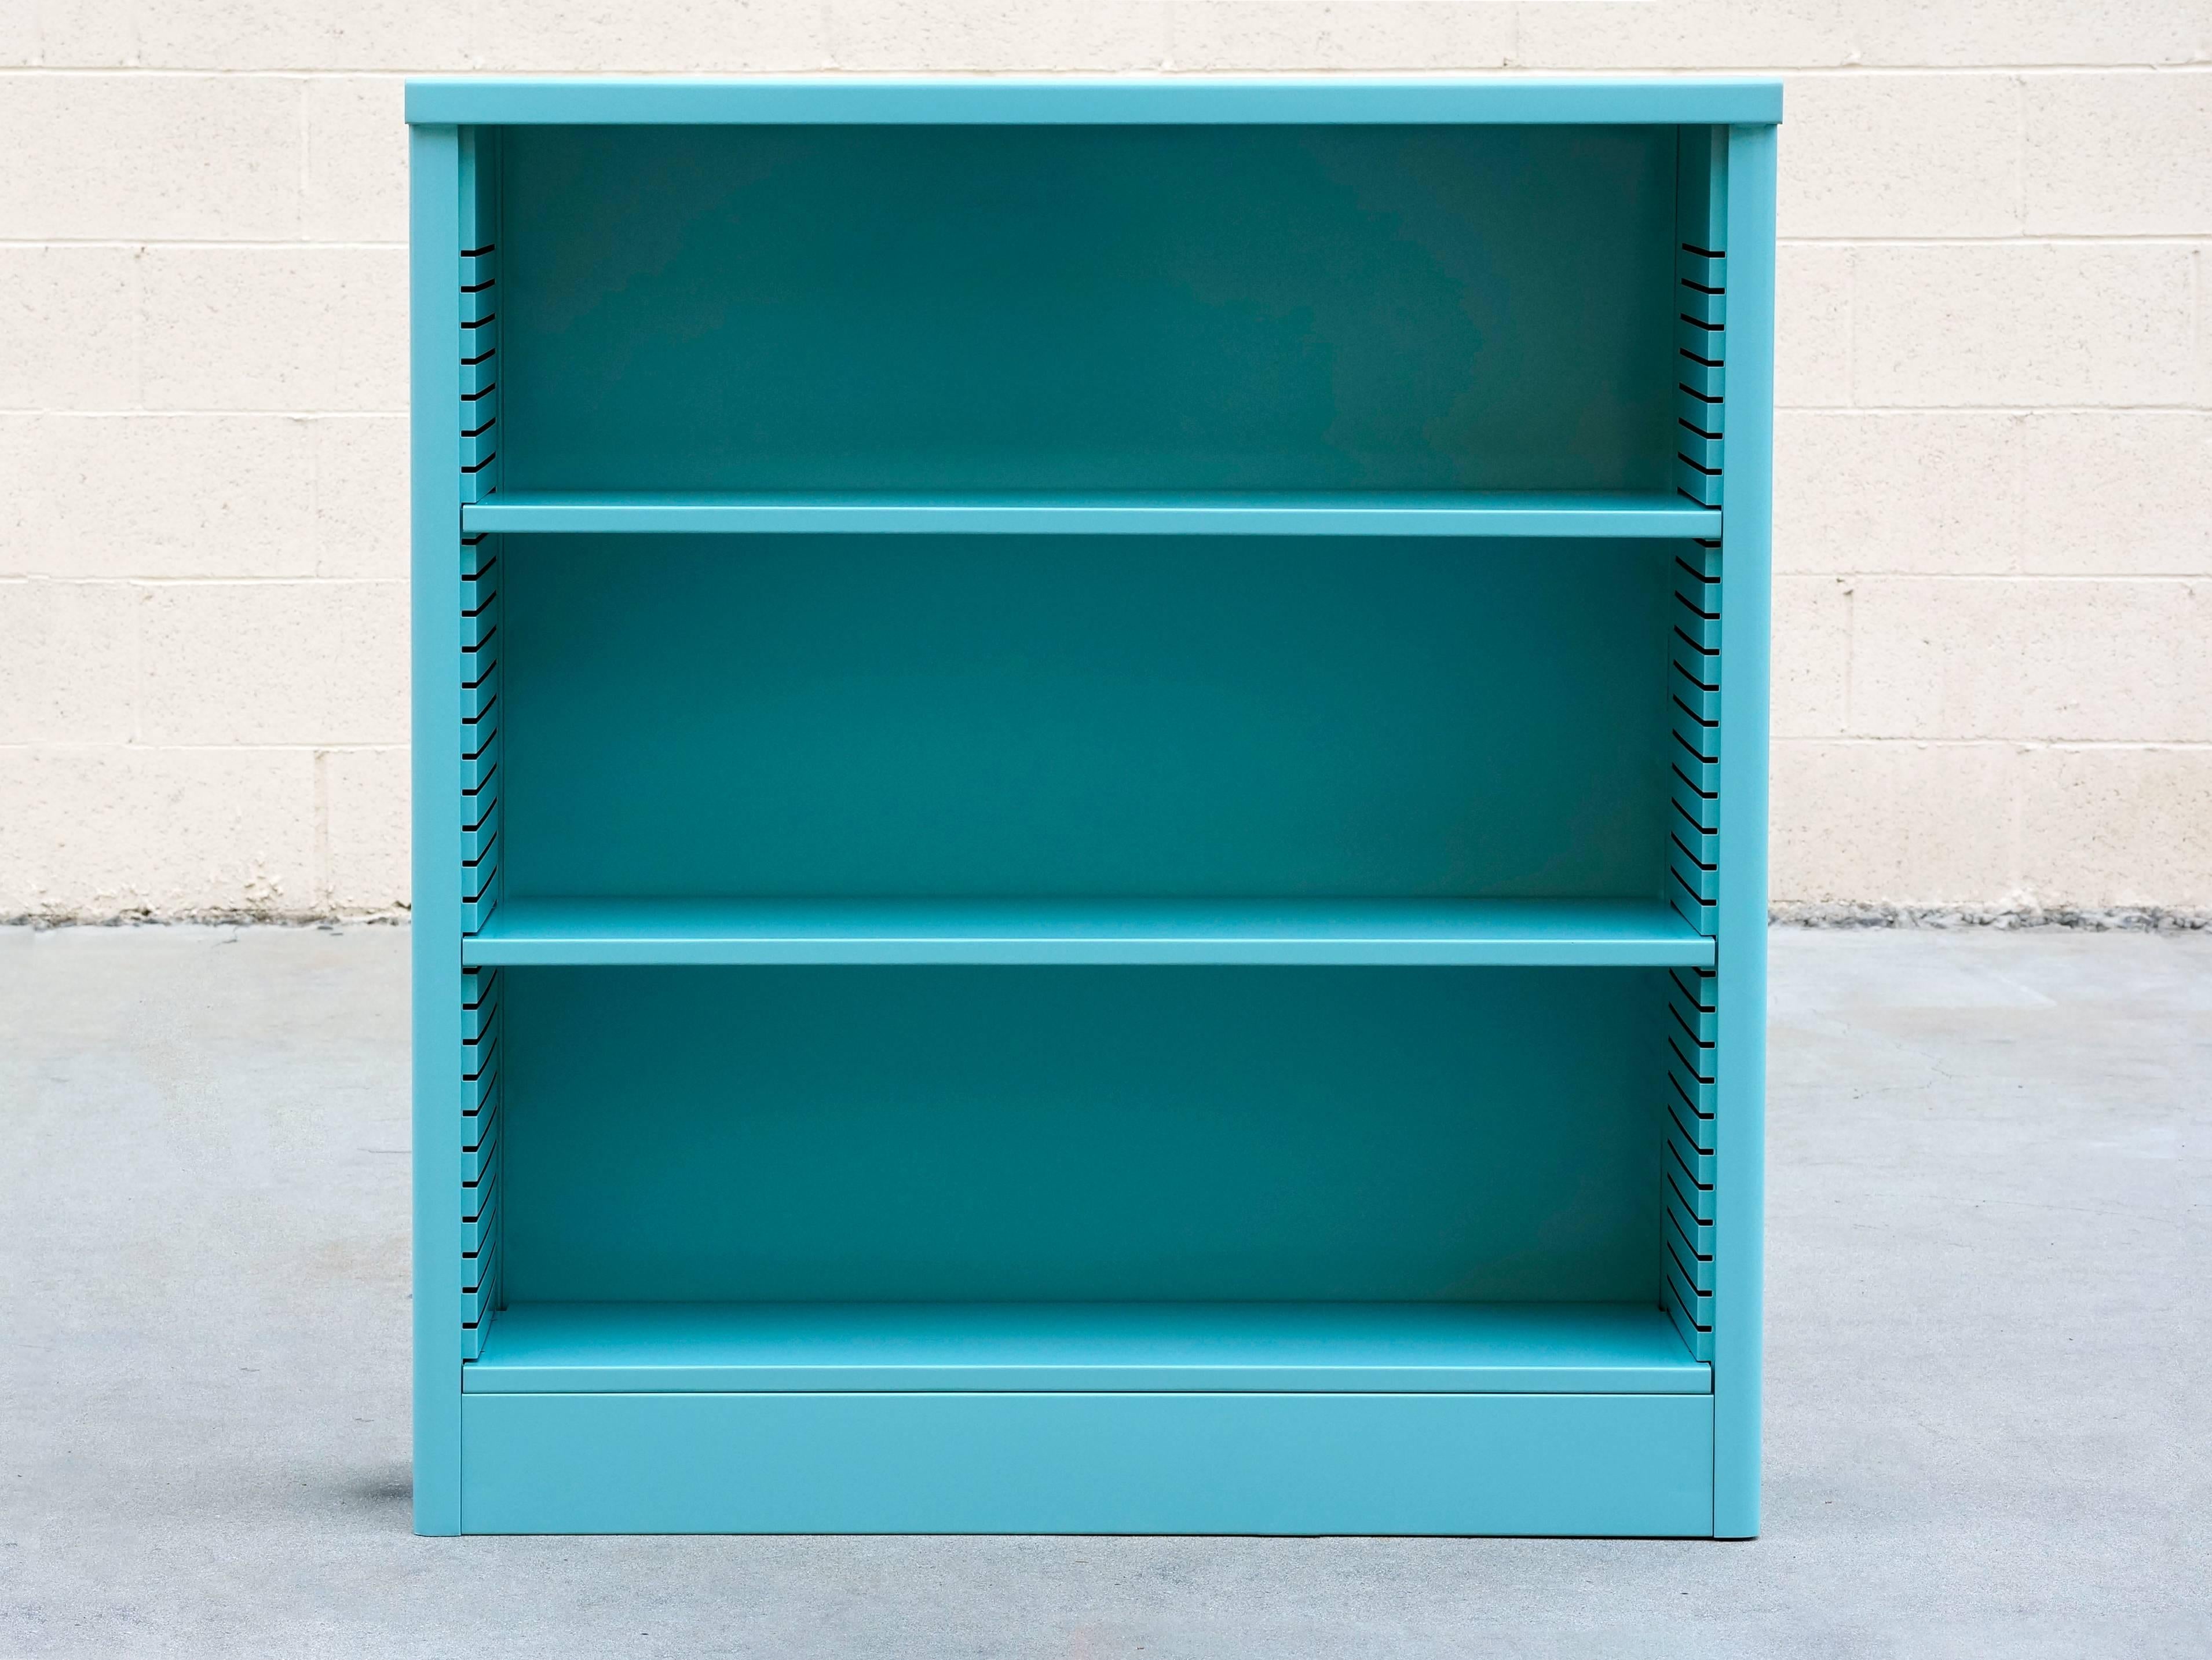 Neat 1960s tanker style steel bookcase freshly powder-coated in high gloss turquoise. Originally used in the UCLA math department, this adjustable three-shelf unit is an excellent storage option– its sleek and compact, yet holds many books. It's